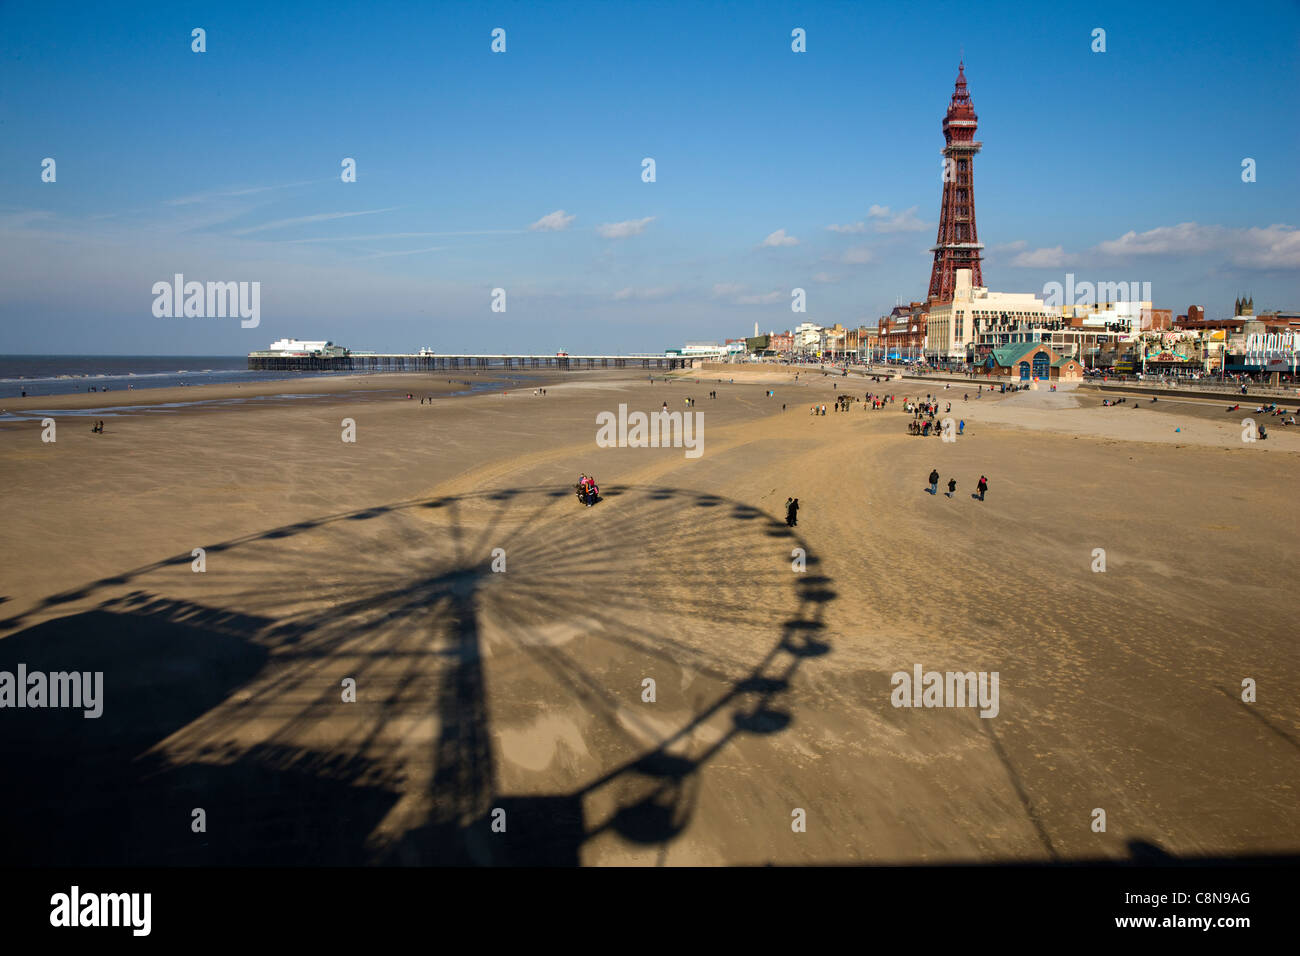 Shadow of the fairground ferris wheel on the beach with Blackpool beach and promenade in the background Stock Photo